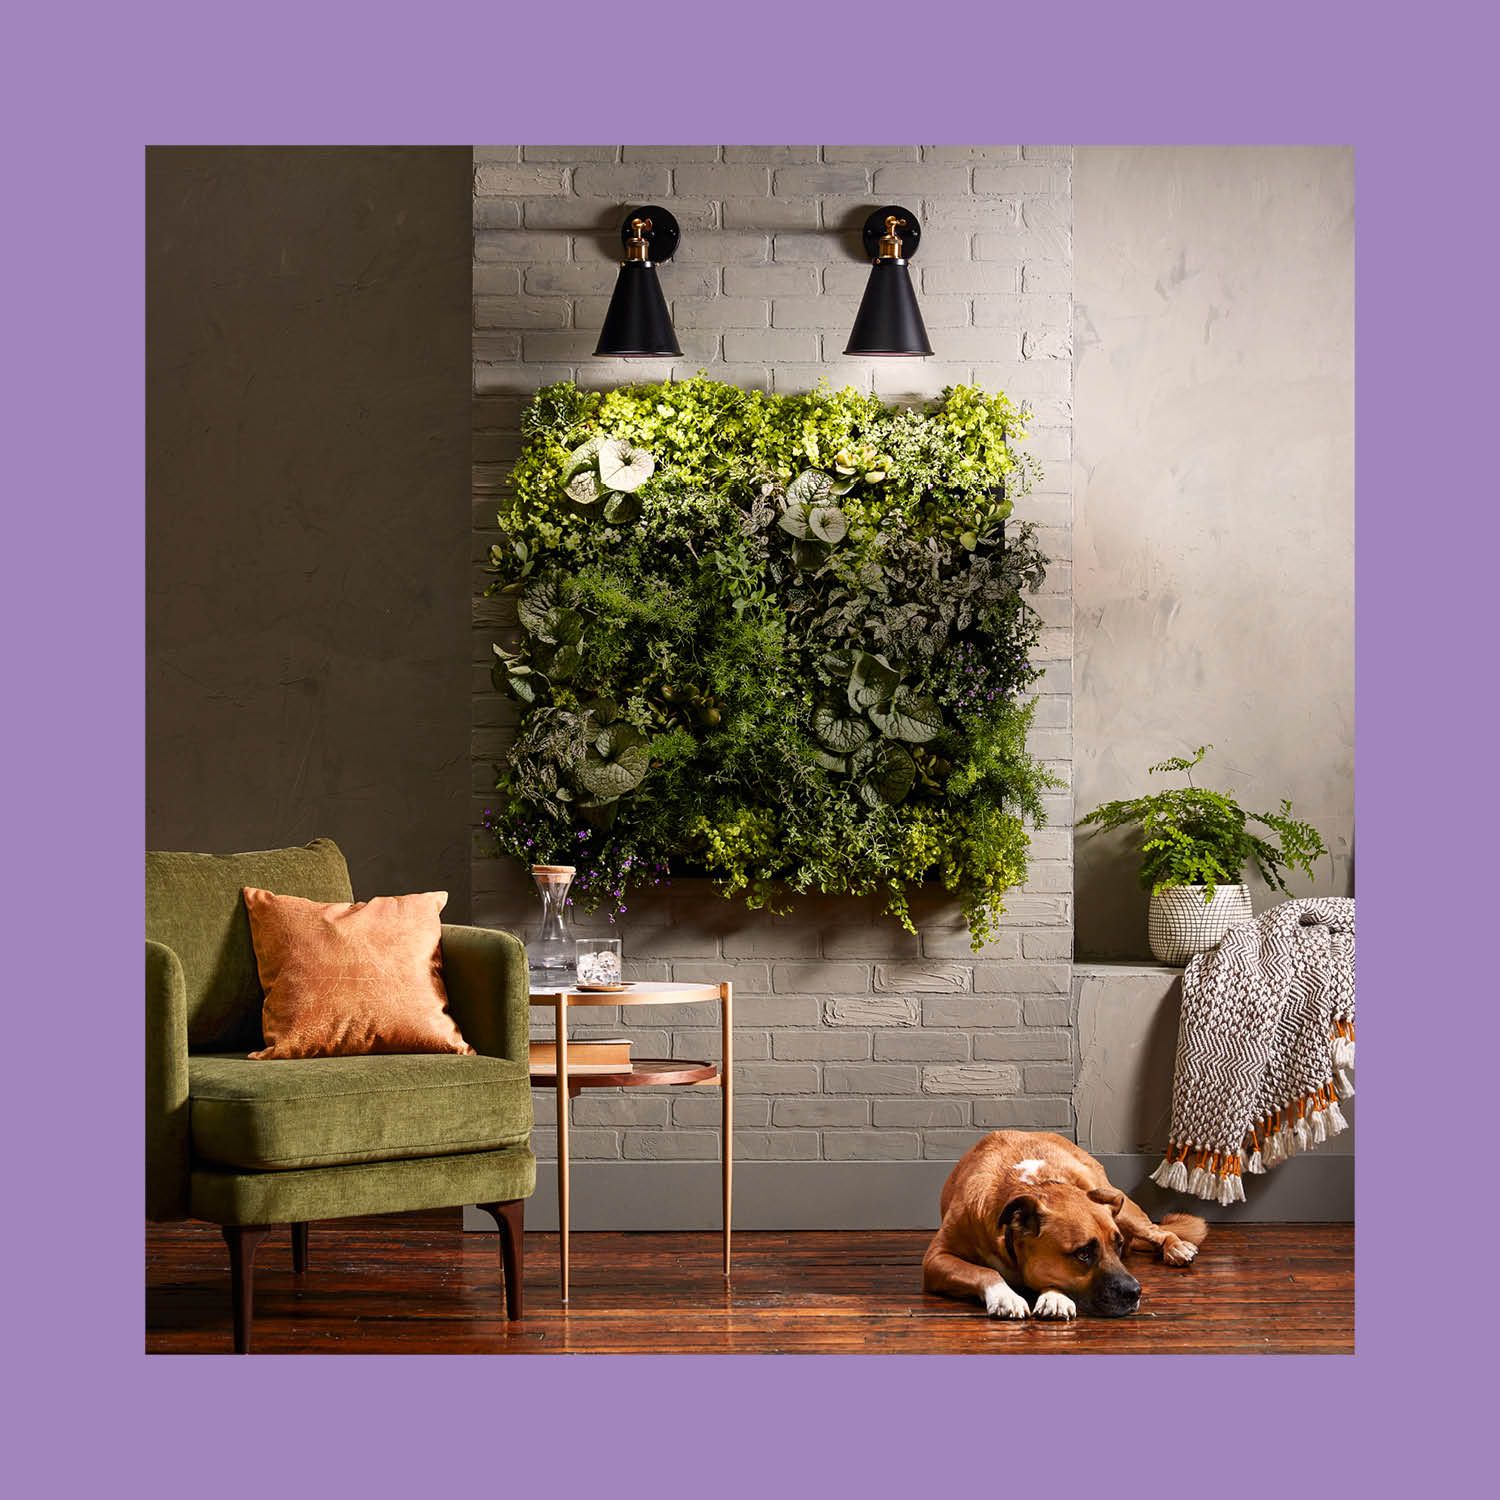 Green, Wall, Violet, Purple, Room, Houseplant, Grass, Plant, Furniture, Rectangle, 